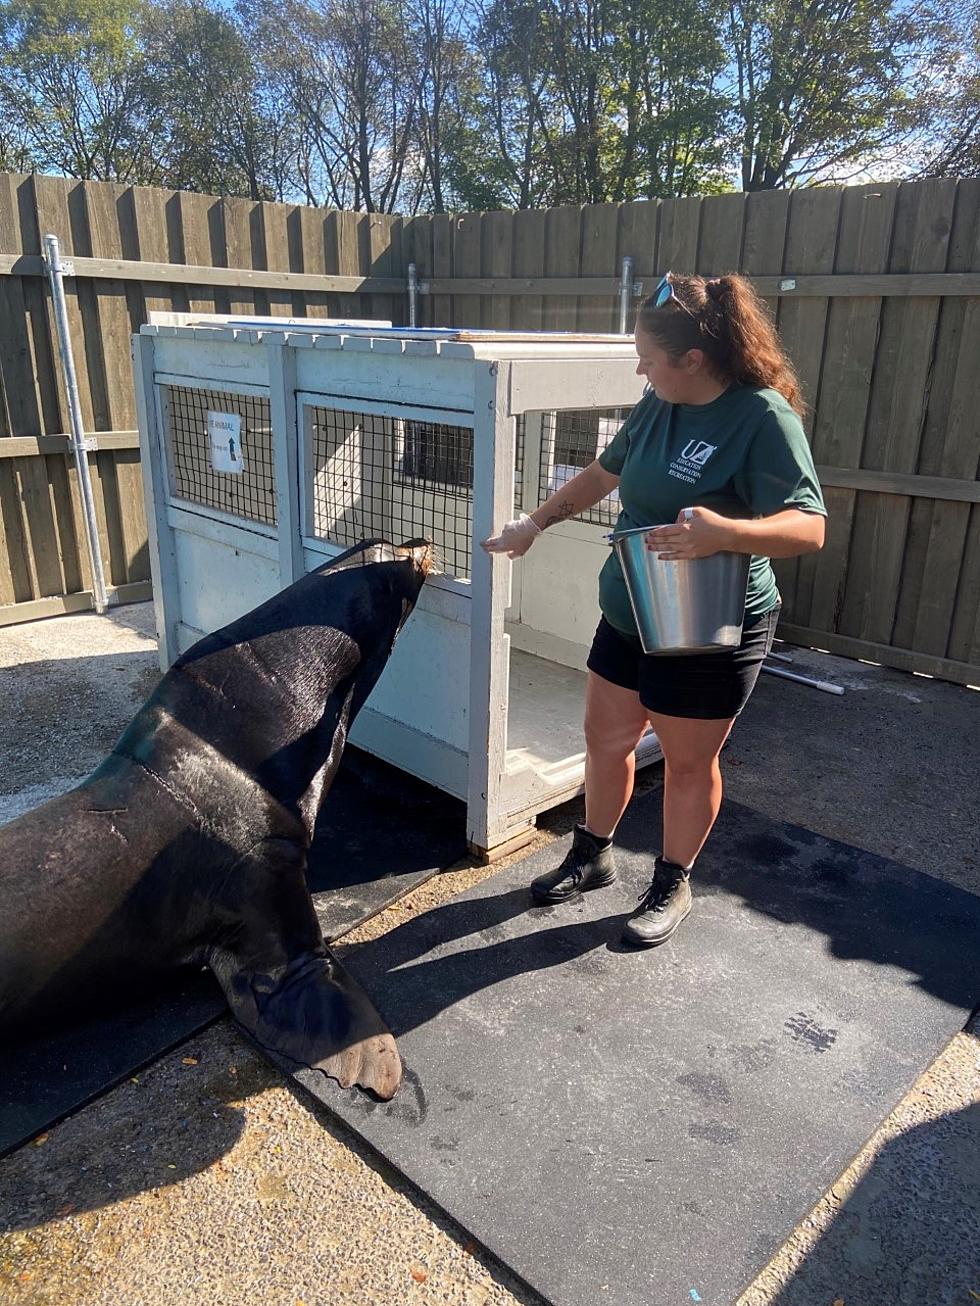 Utica Zoo Says Good Bye To Popular Sea Lions ‘Porter’ And ‘Munchkin’